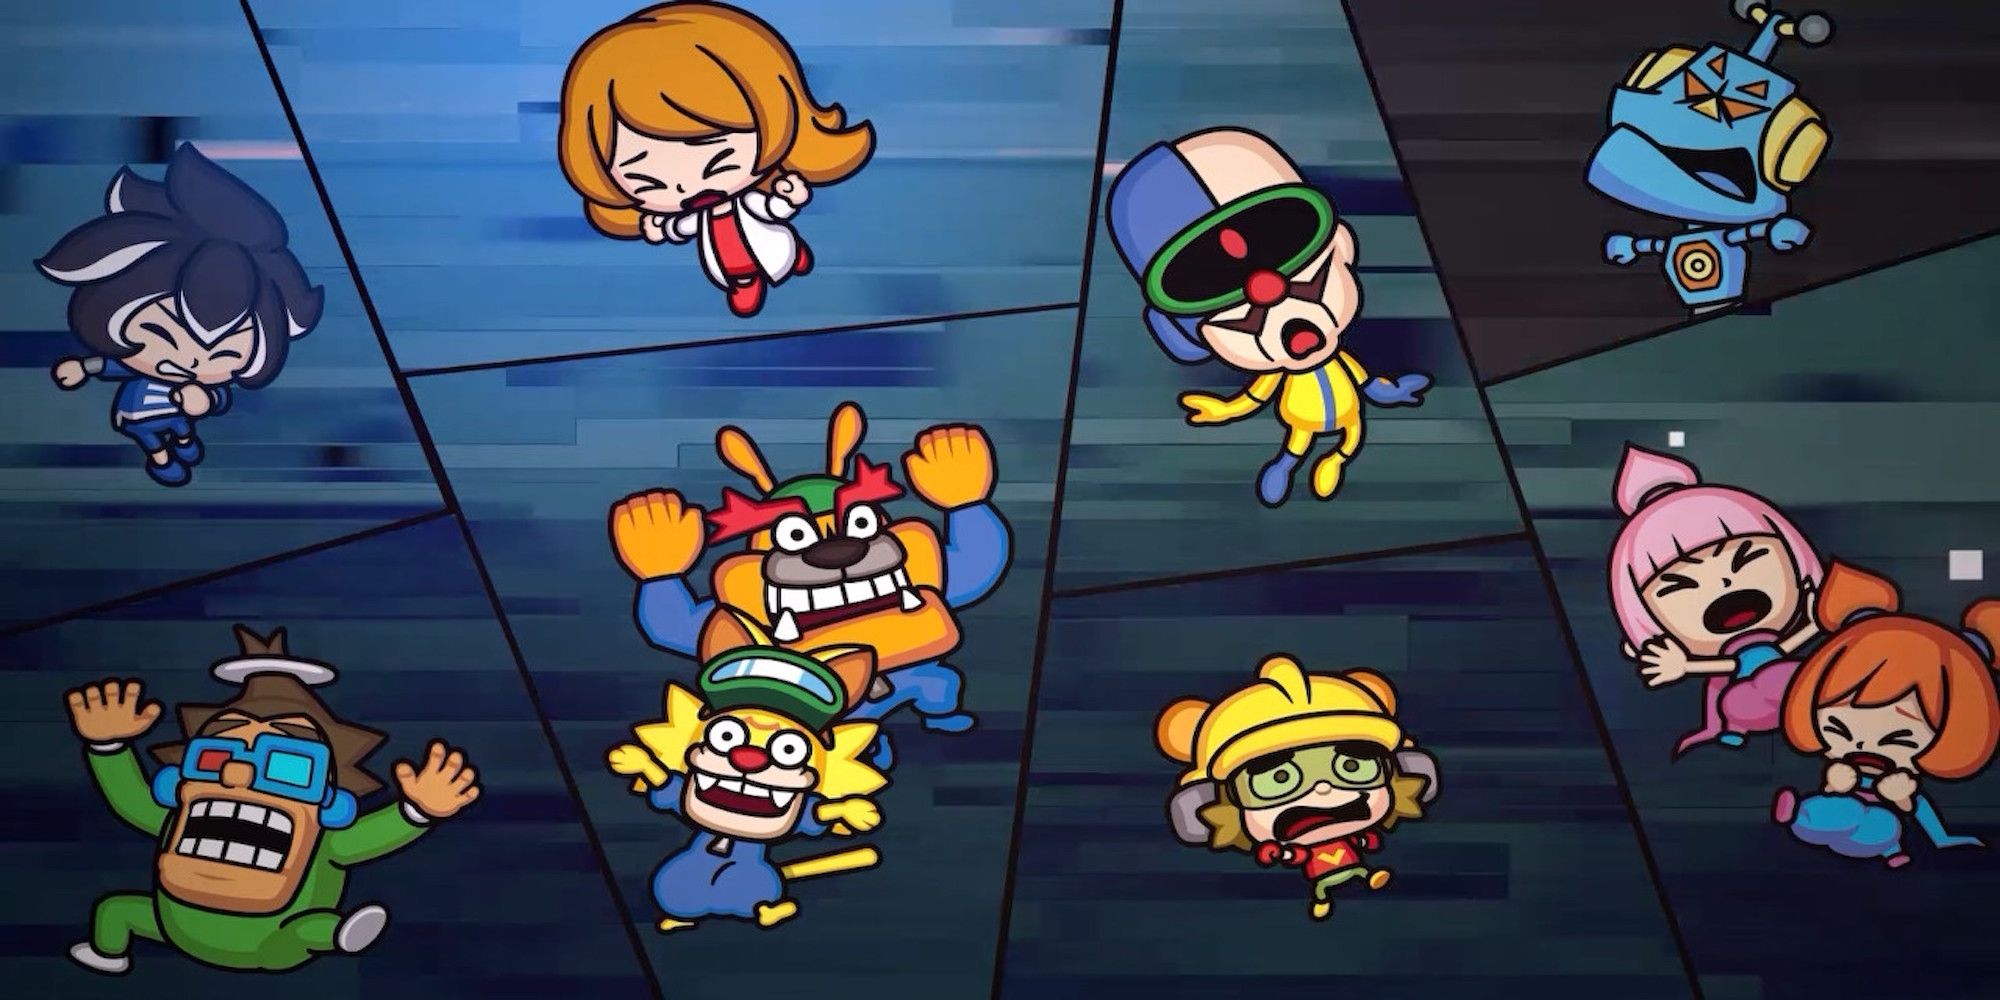 A cutscene featuring characters from WarioWare: Get It Together